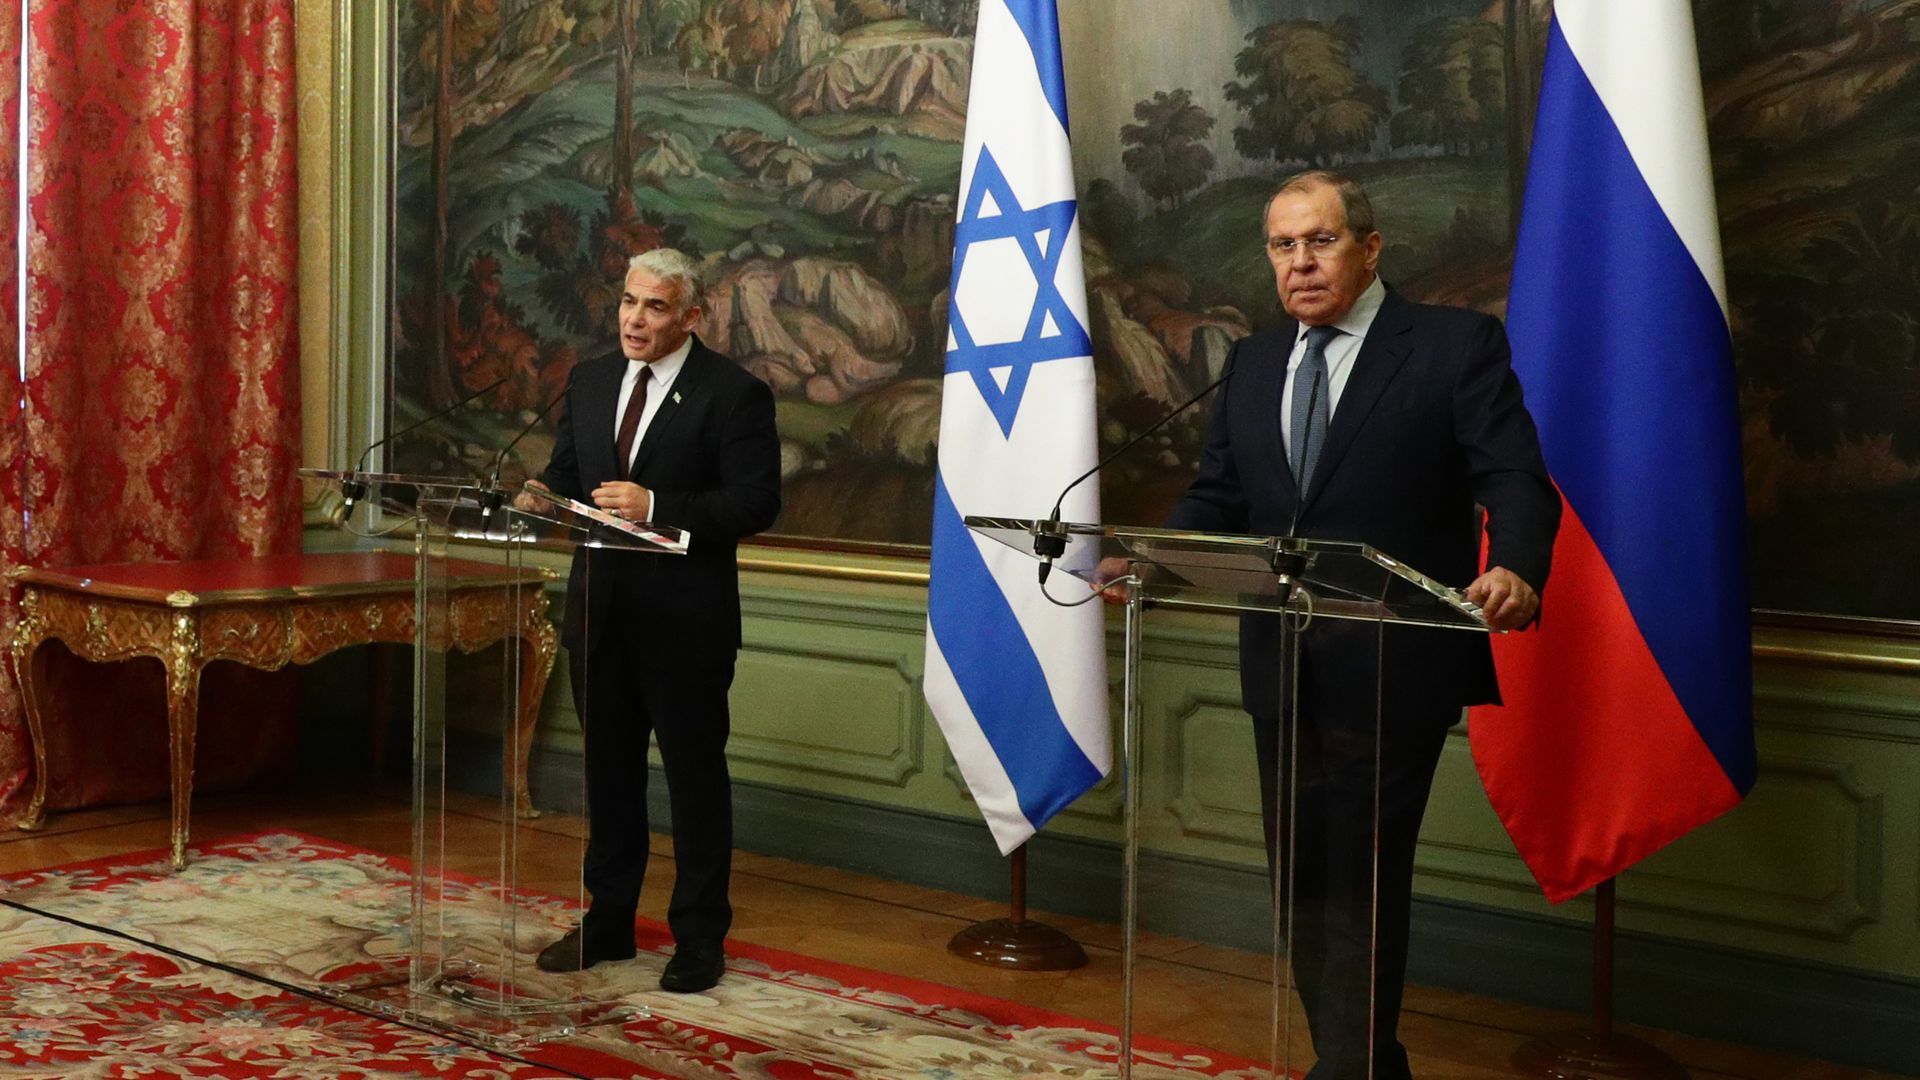 Russia's Foreign Minister Sergey Lavrov (right) and Israel's Foreign Minister Yair Lapid speak in Moscow in September 2021. Photo: Russian Foreign Ministry/TASS via Getty Images